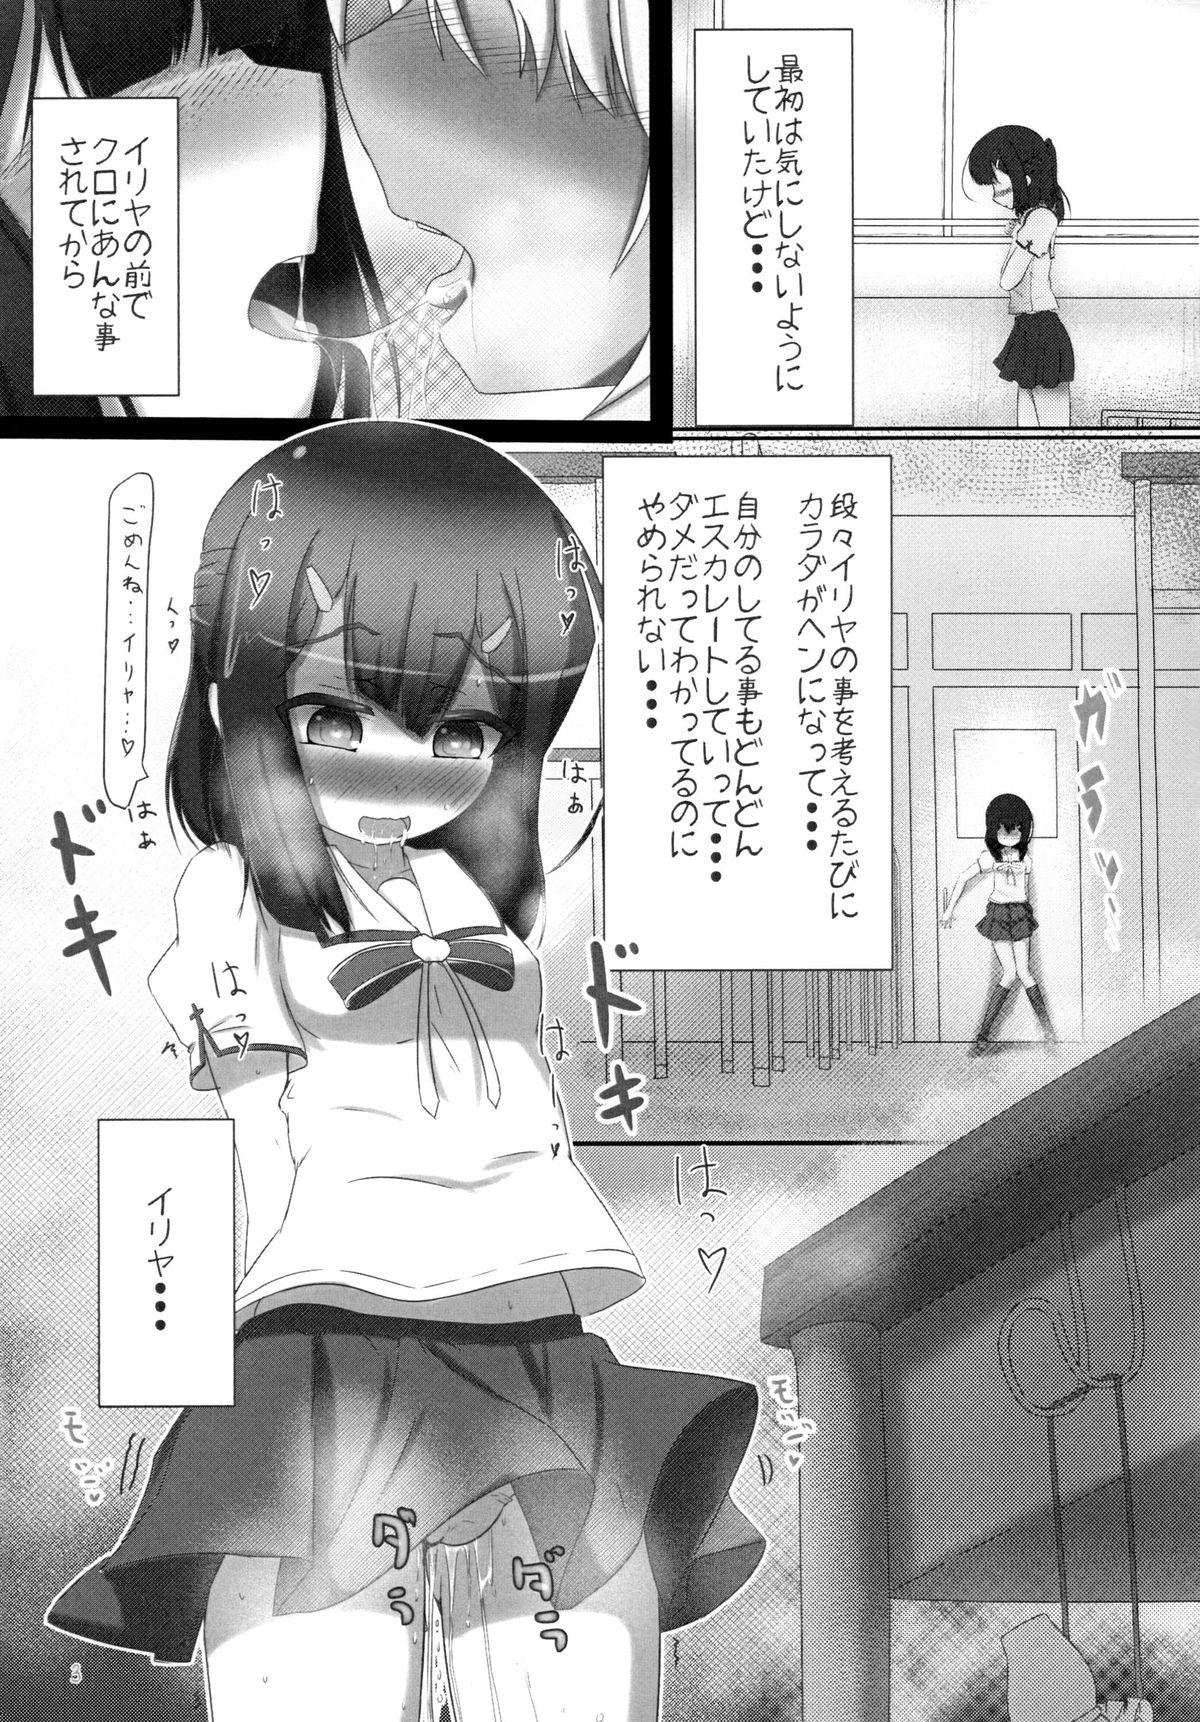 Girl Gets Fucked Fuechupa Shoujo - Fate kaleid liner prisma illya Masseuse - Page 2